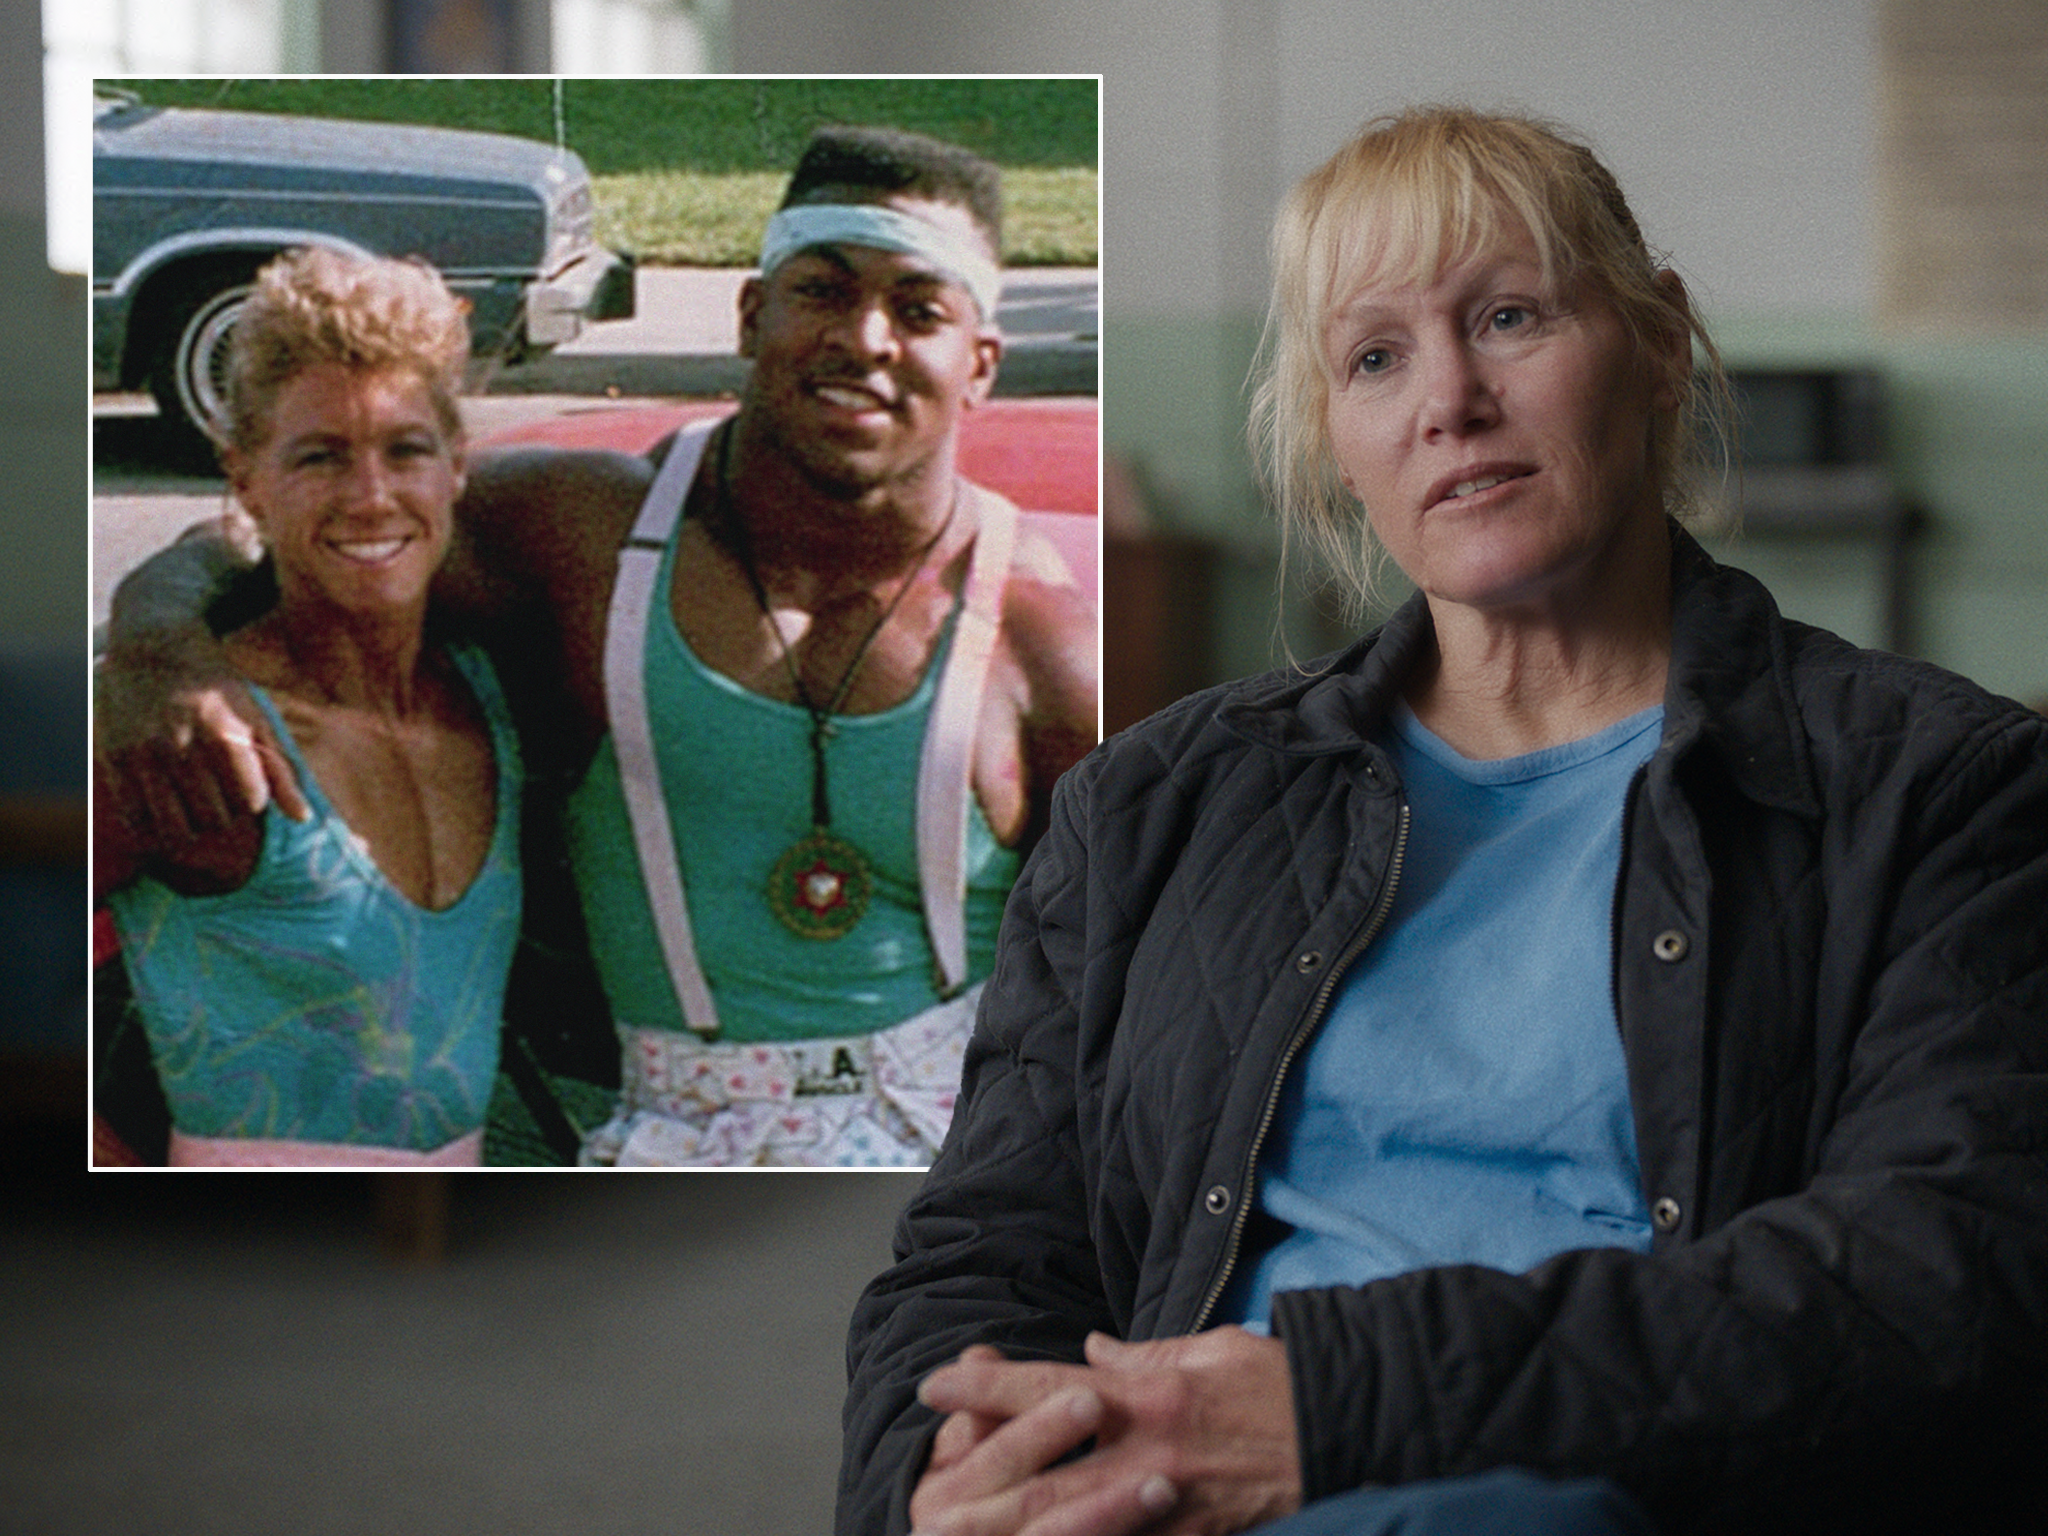 Sally McNeil (right) was charged with murder after shooting her husband Ray McNeil (pictured with her left in the insert). The new Netflix documentary ‘Killer Sally’ revisits the case